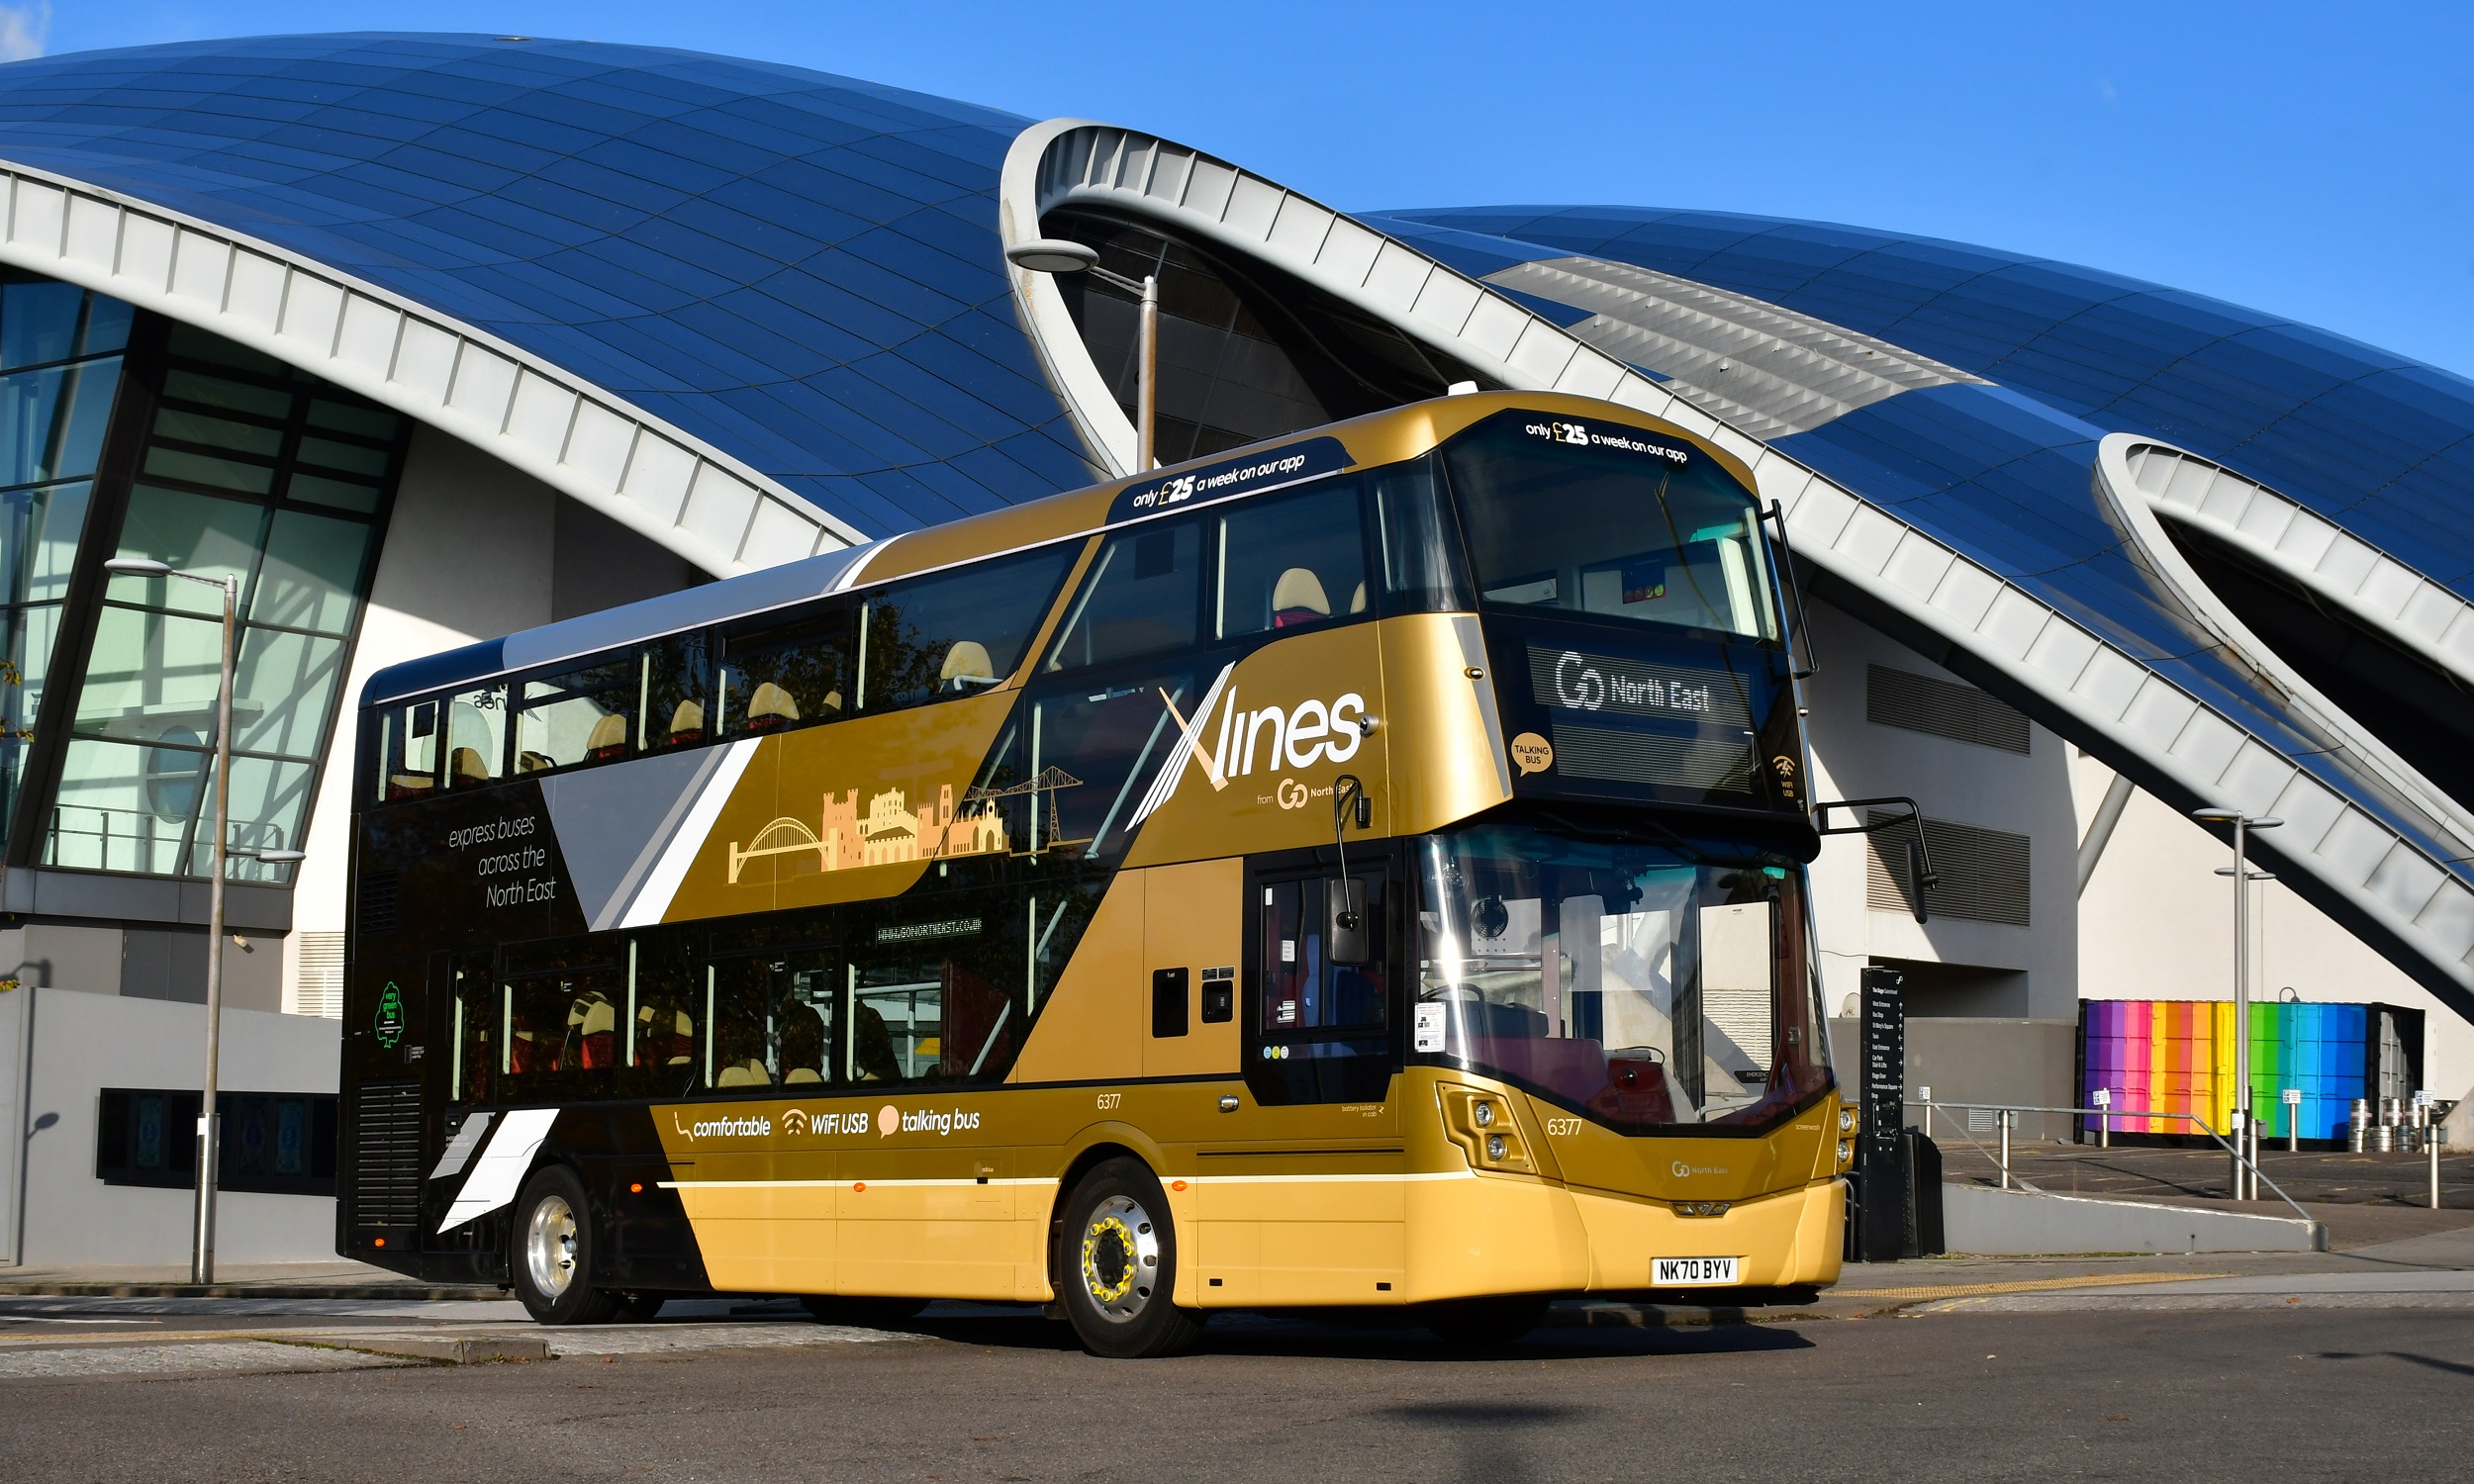 Go North East invests in a Wrightbus first